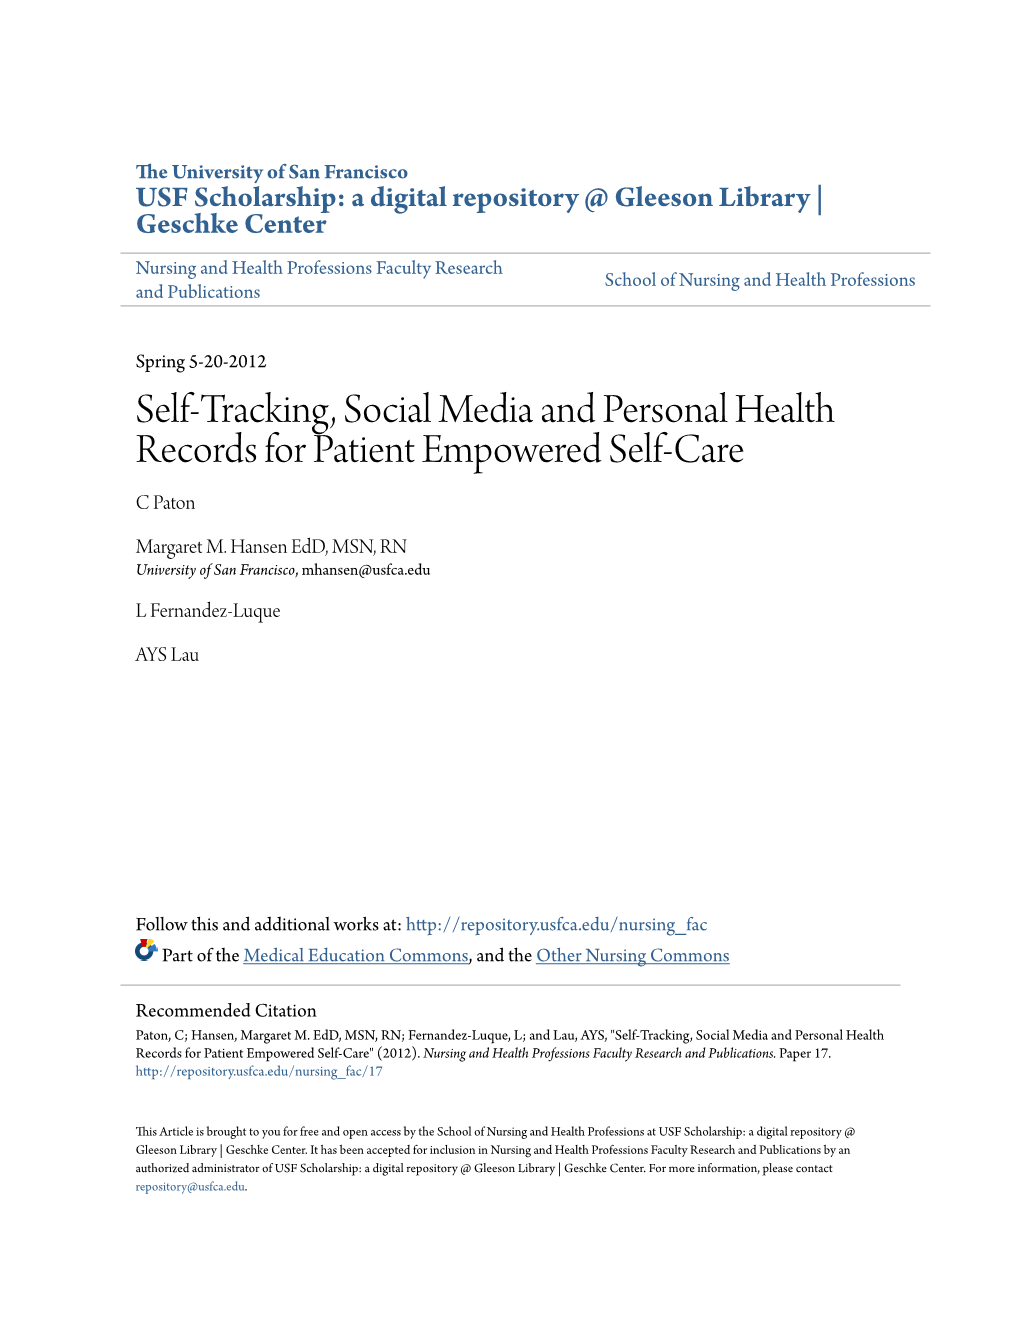 Self-Tracking, Social Media and Personal Health Records for Patient Empowered Self-Care C Paton